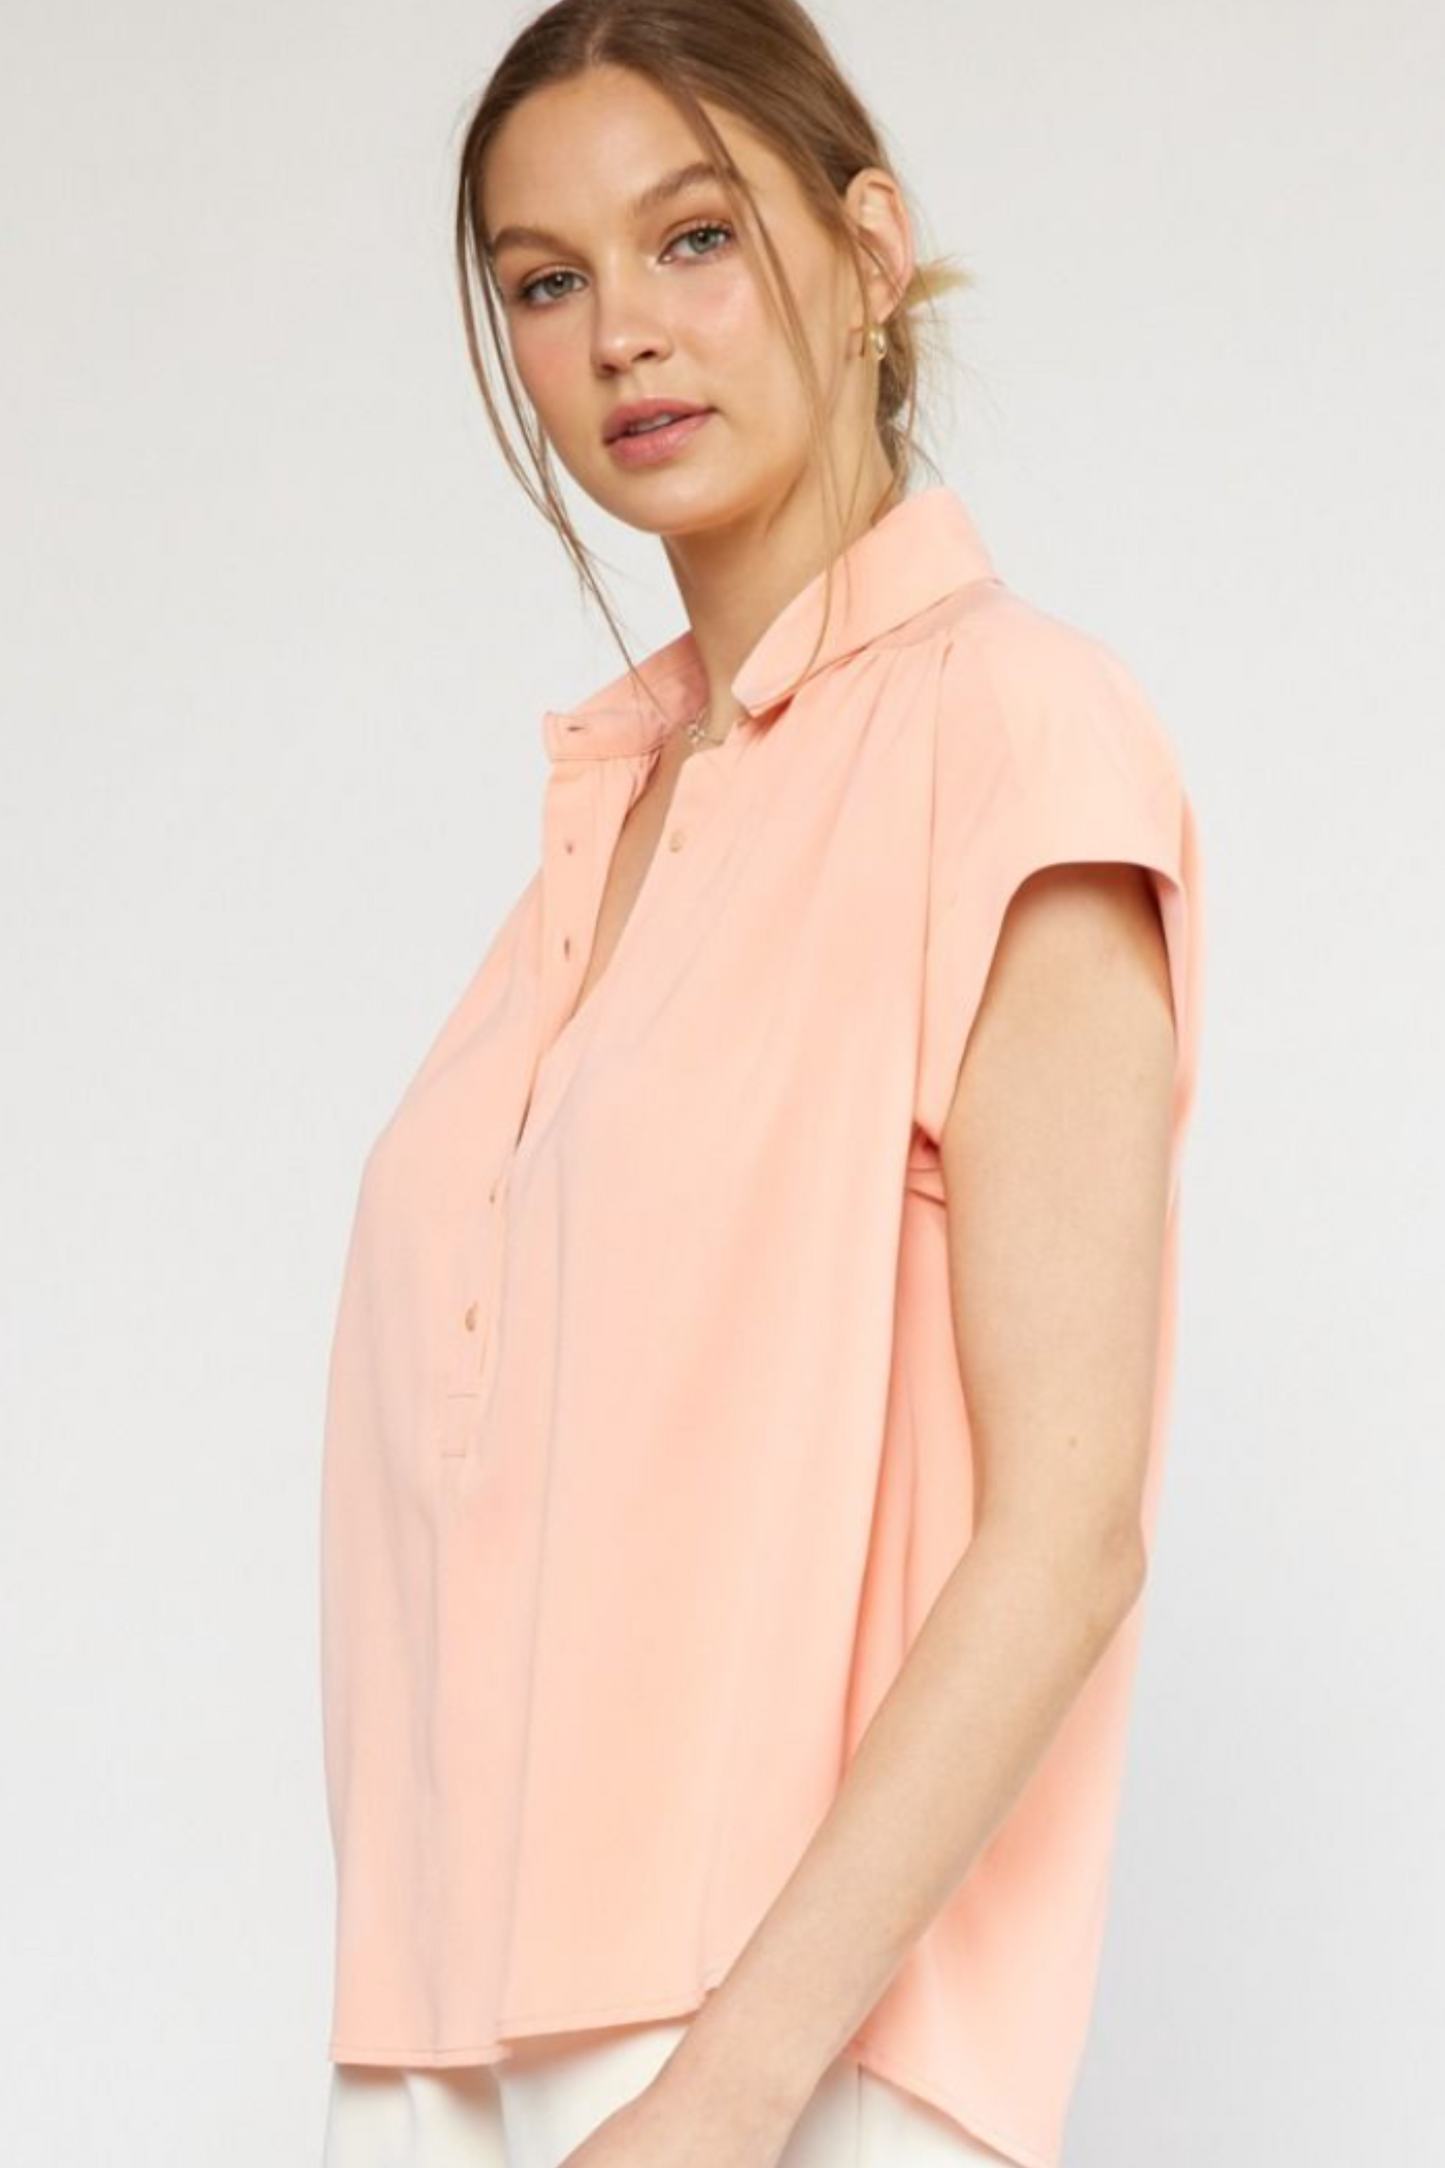 Effortless Blouse - Simply Polished Boutique